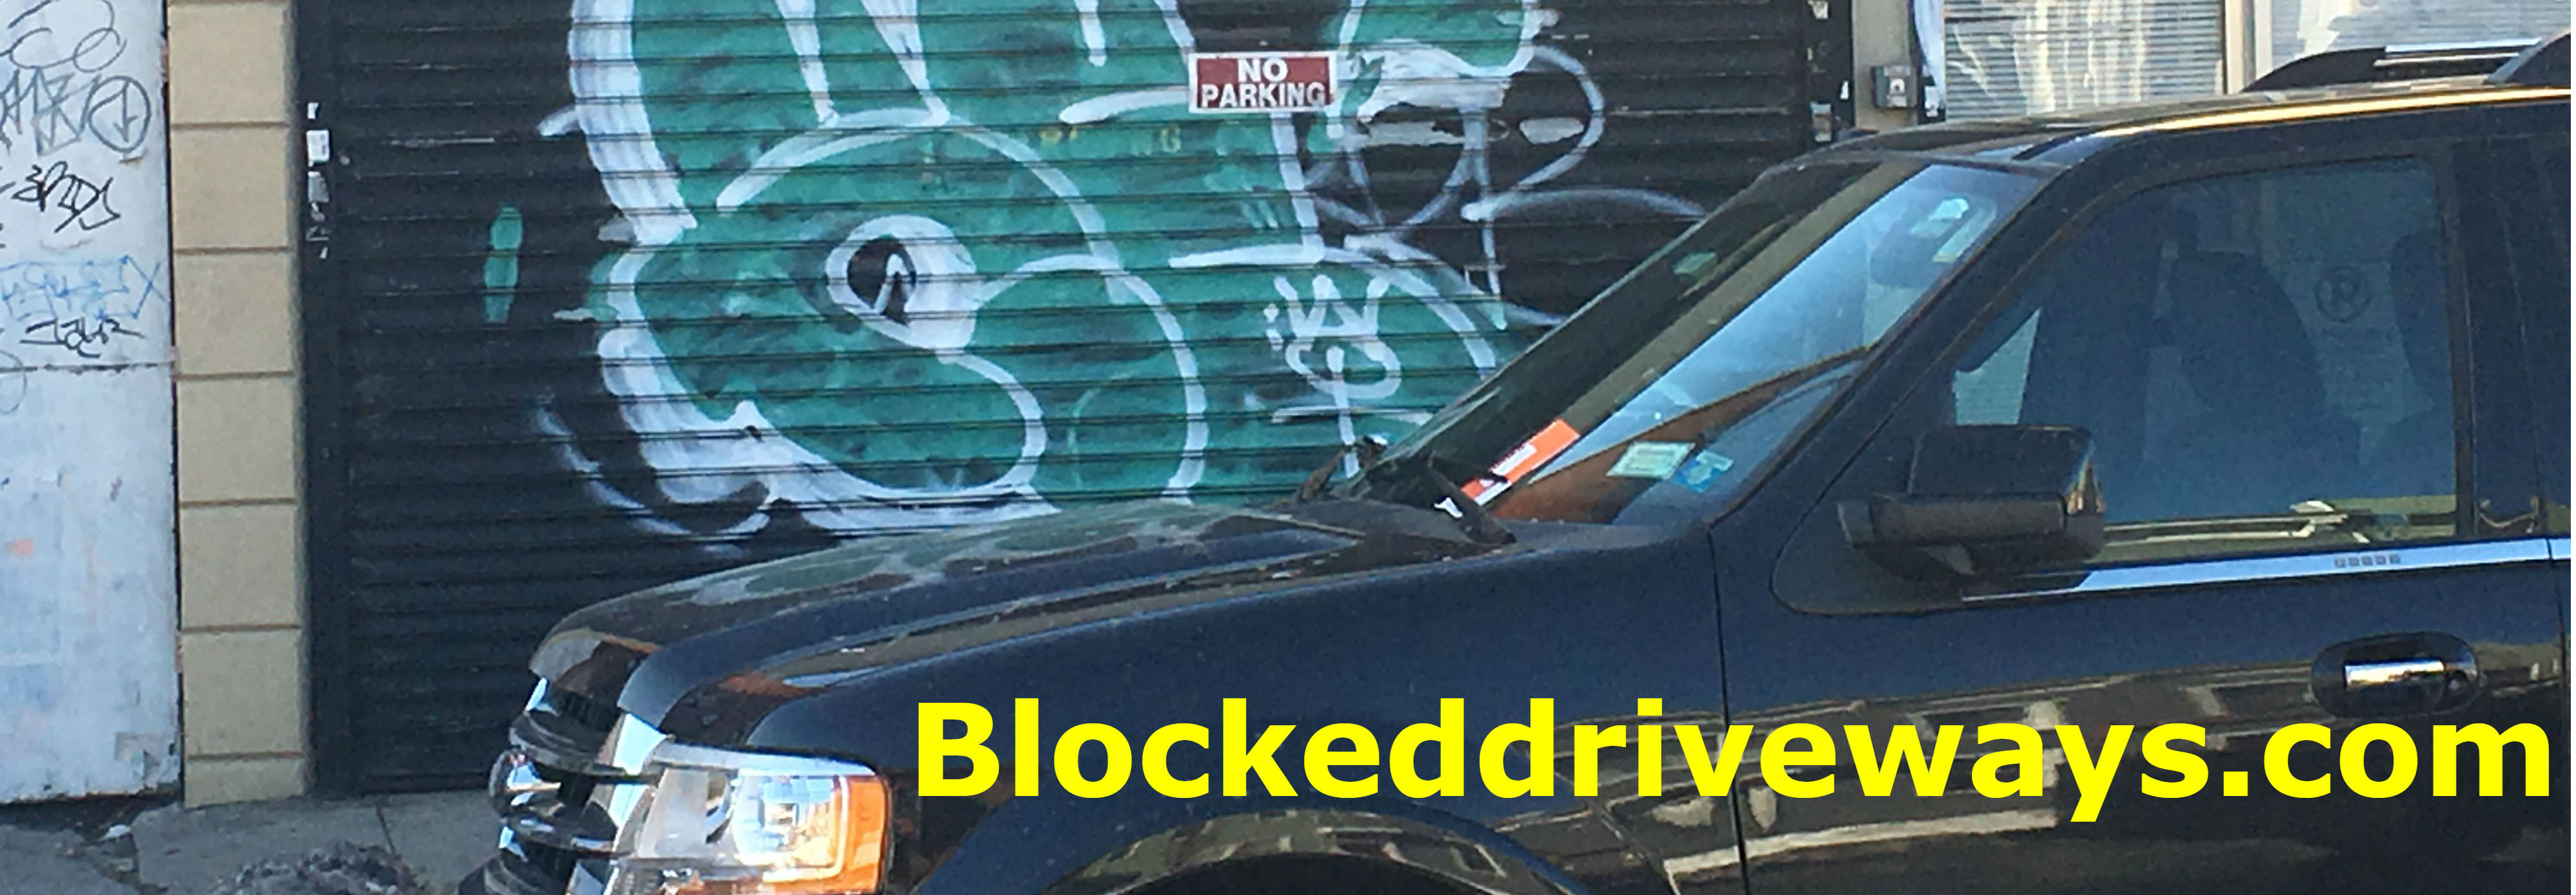 24 hour Brooklyn Blocked driveway Towing service